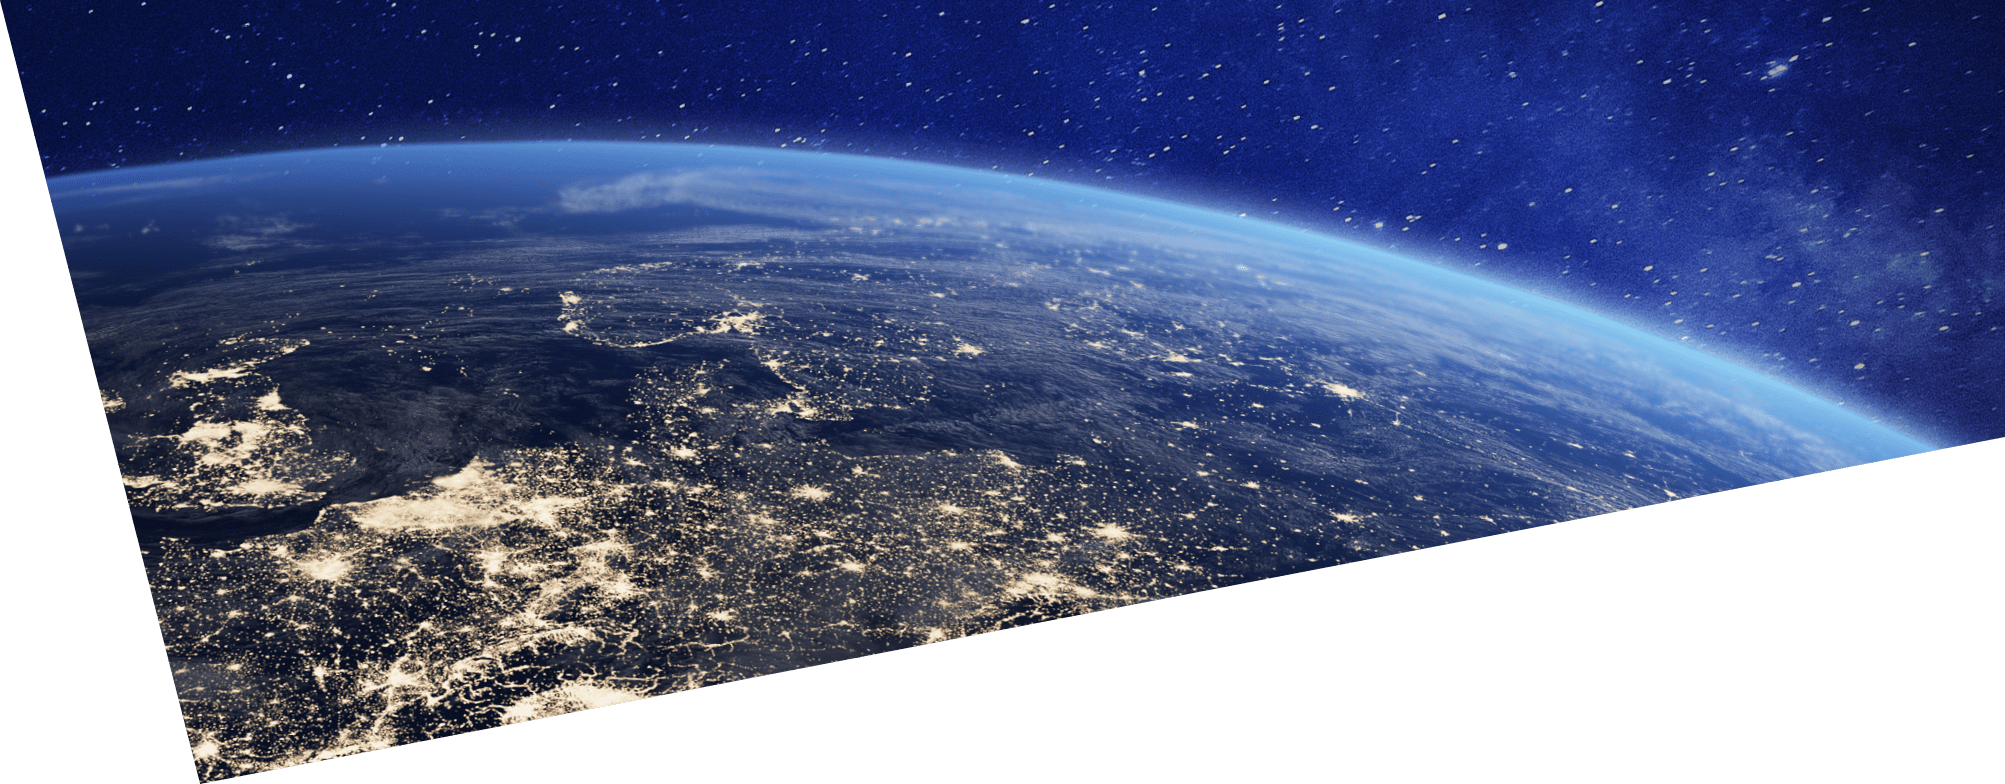 Europe at night viewed from space with city lights showing human activity in Germany, France, Spain, Italy and other countries, 3d rendering of planet Earth, elements from NASA; Shutterstock ID 1072726052; purchase_order: -; job: -; client: -; other: -